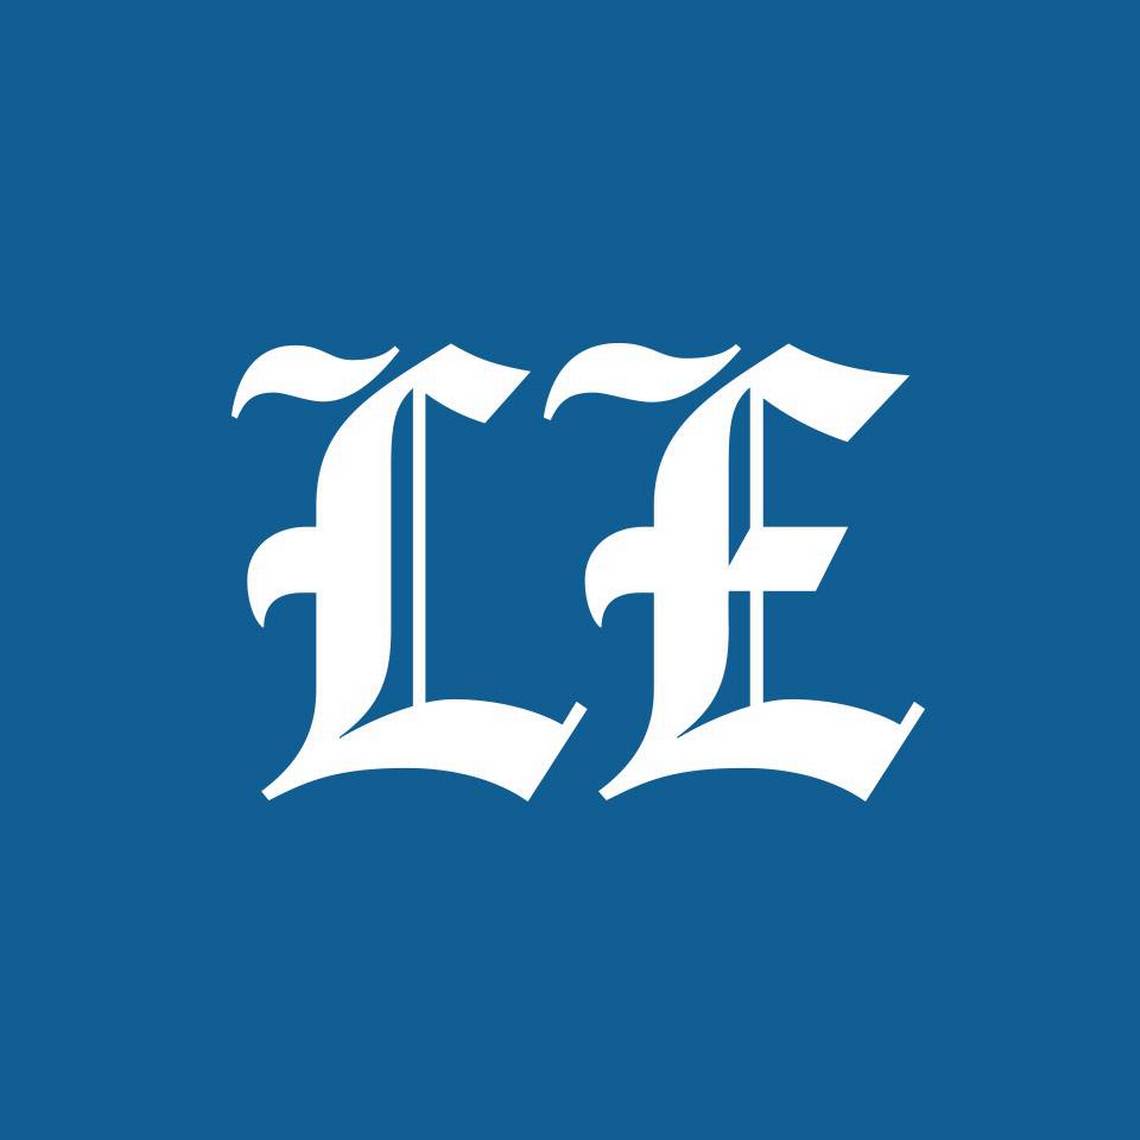 Get in on the conversation: A new commenting experience is coming to the Ledger-Enquirer